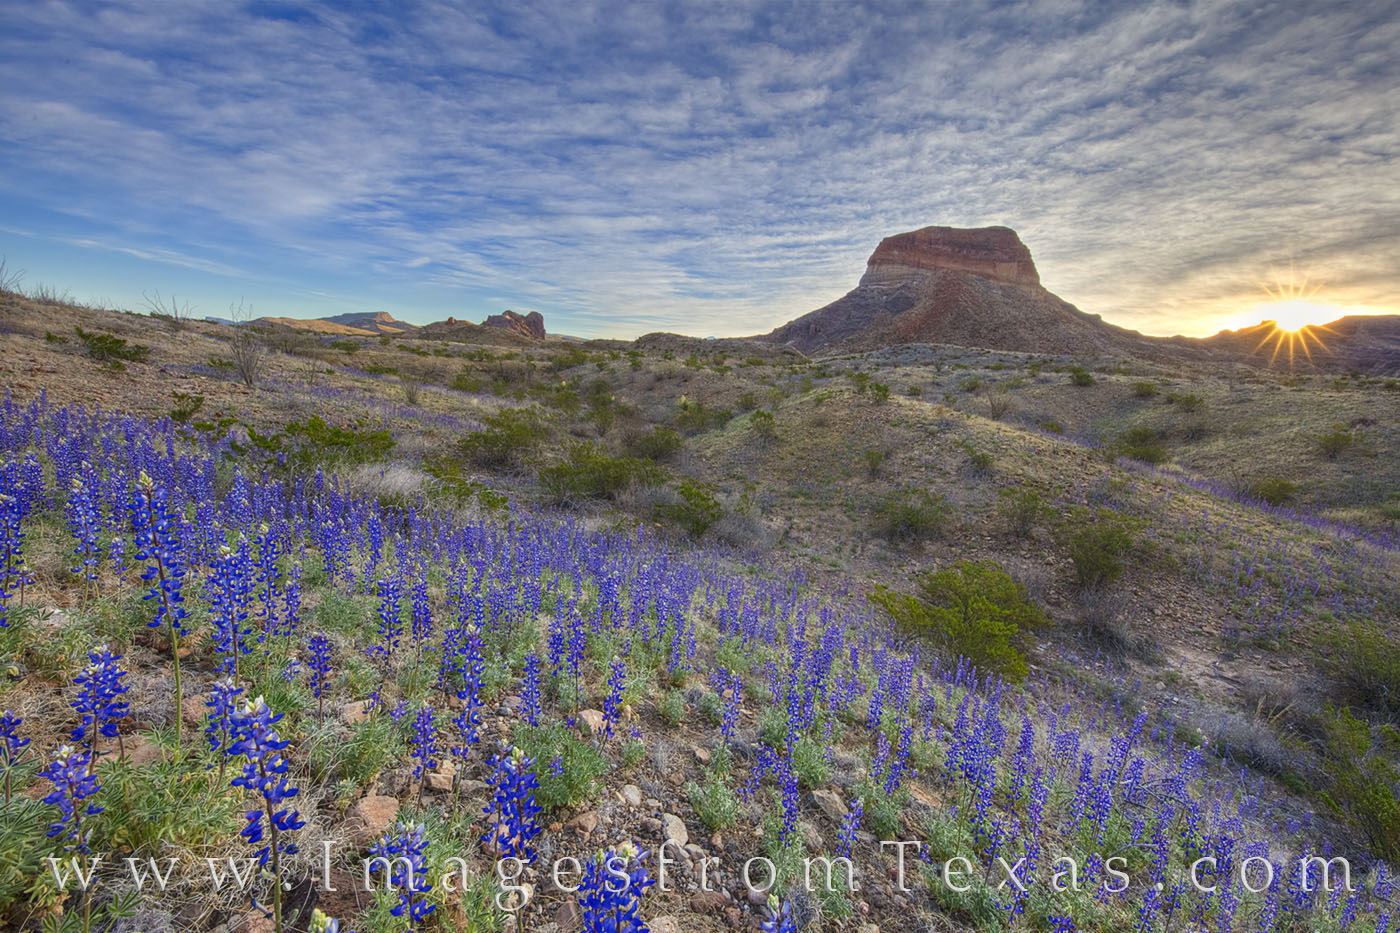 The early spring of 2019 saw one of the most spectacular bluebonnet blooms of Big Bend National Park in recent memory. Park Rangers...